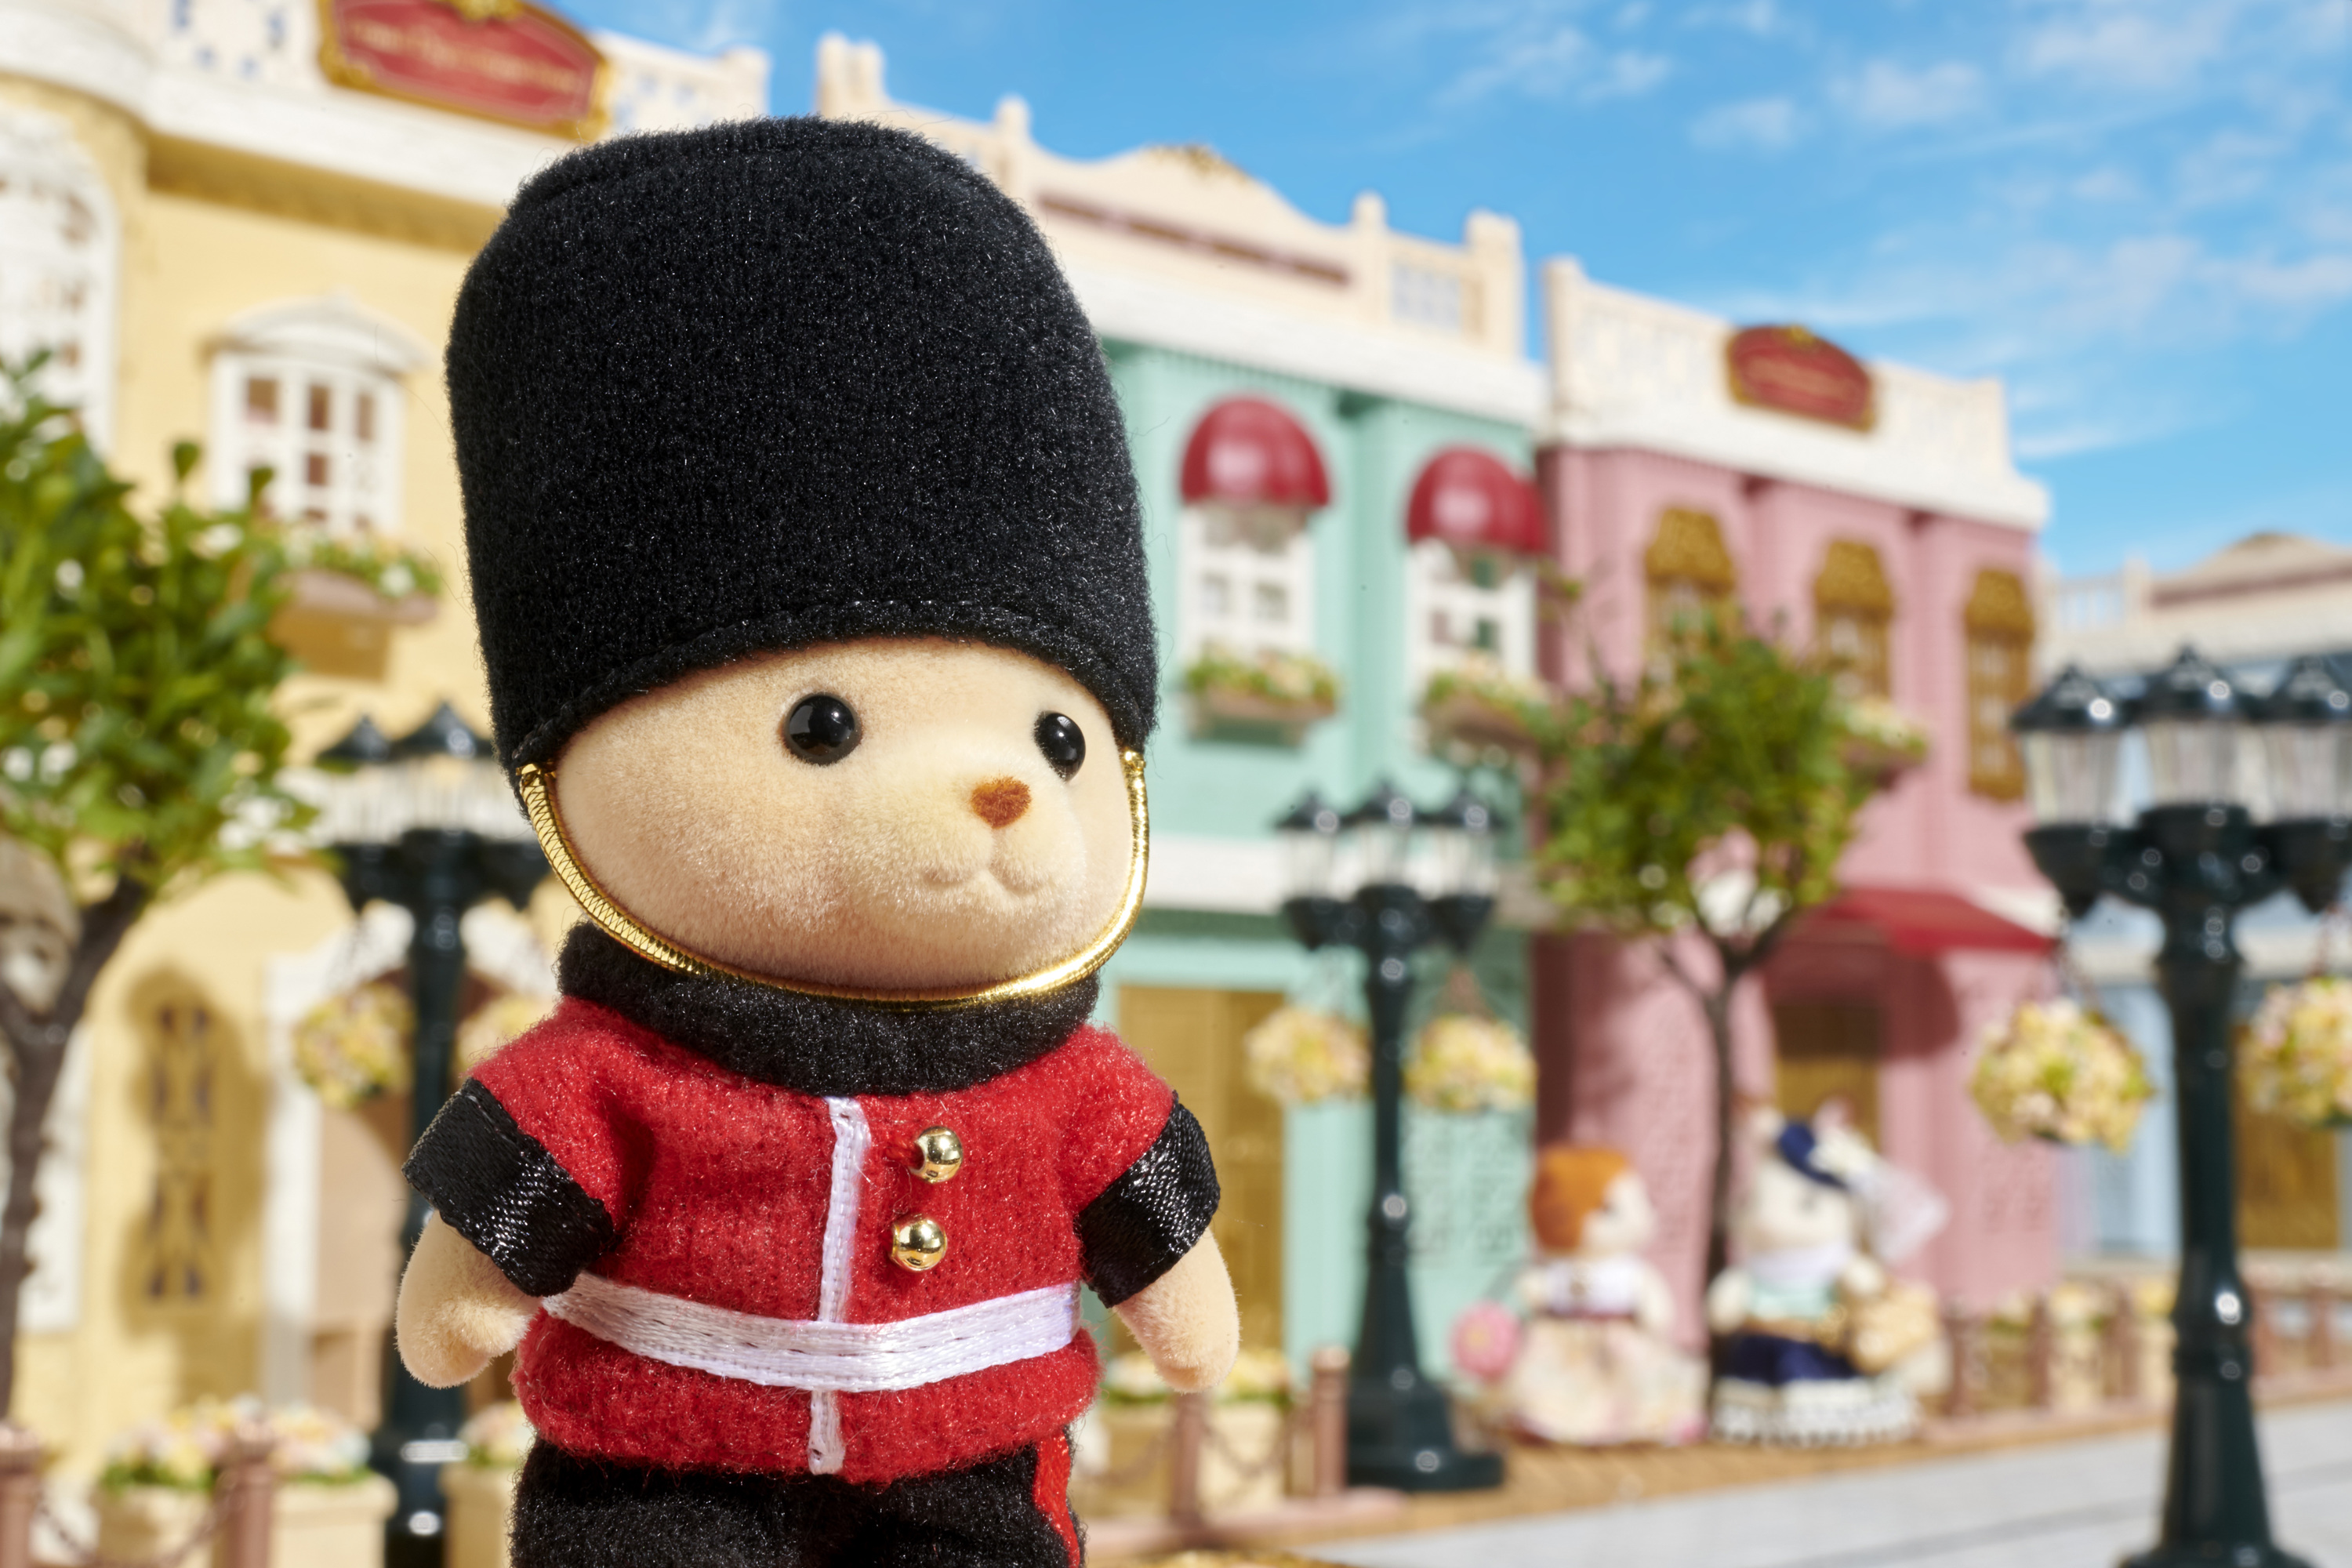 Sylvanian Families Official UK on Instagram: The town sparkled